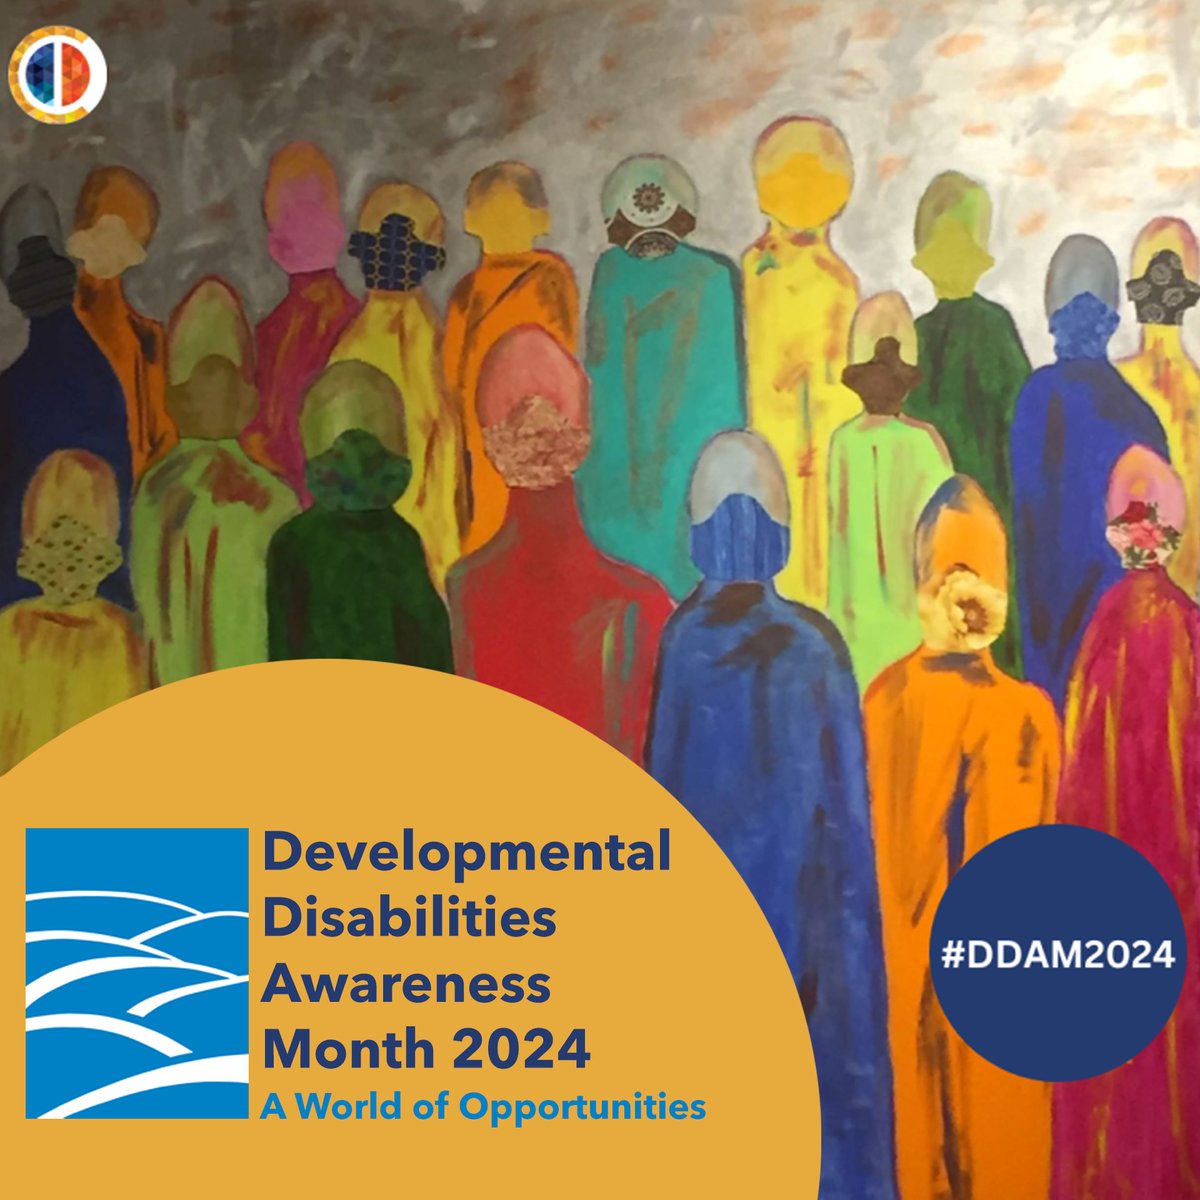 Join Seven Hills this month and every month as we celebrate all abilities, find inspiration in diversity, and work together to continue building stronger and more inclusive communities. #DDAM2024 Learn more about Lee Waters, the artist behind the artwork: Leewaters.org